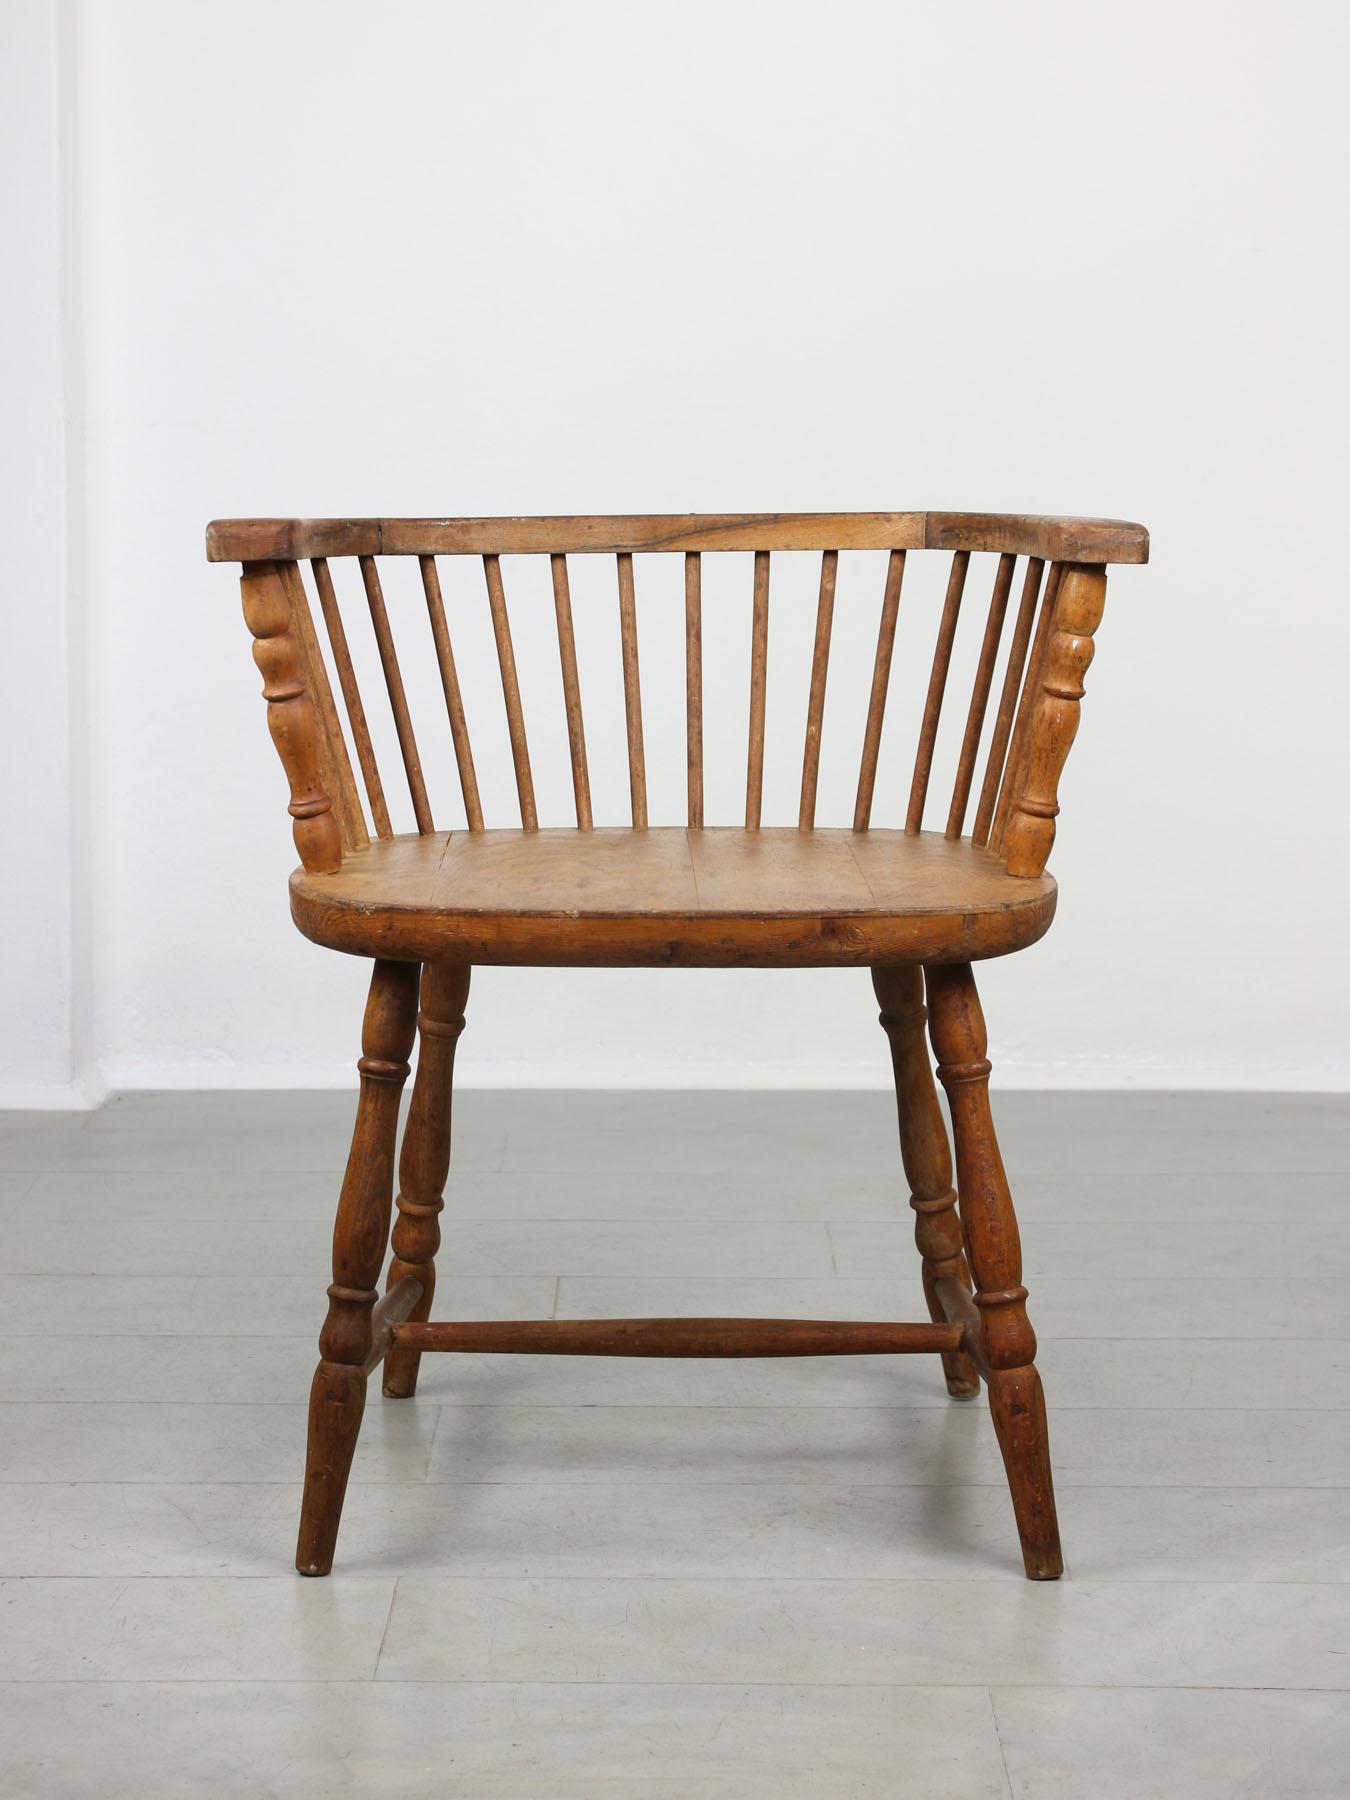 Set of English Antique Windsor Low Back Chairs In Good Condition For Sale In Ljubljana, SI